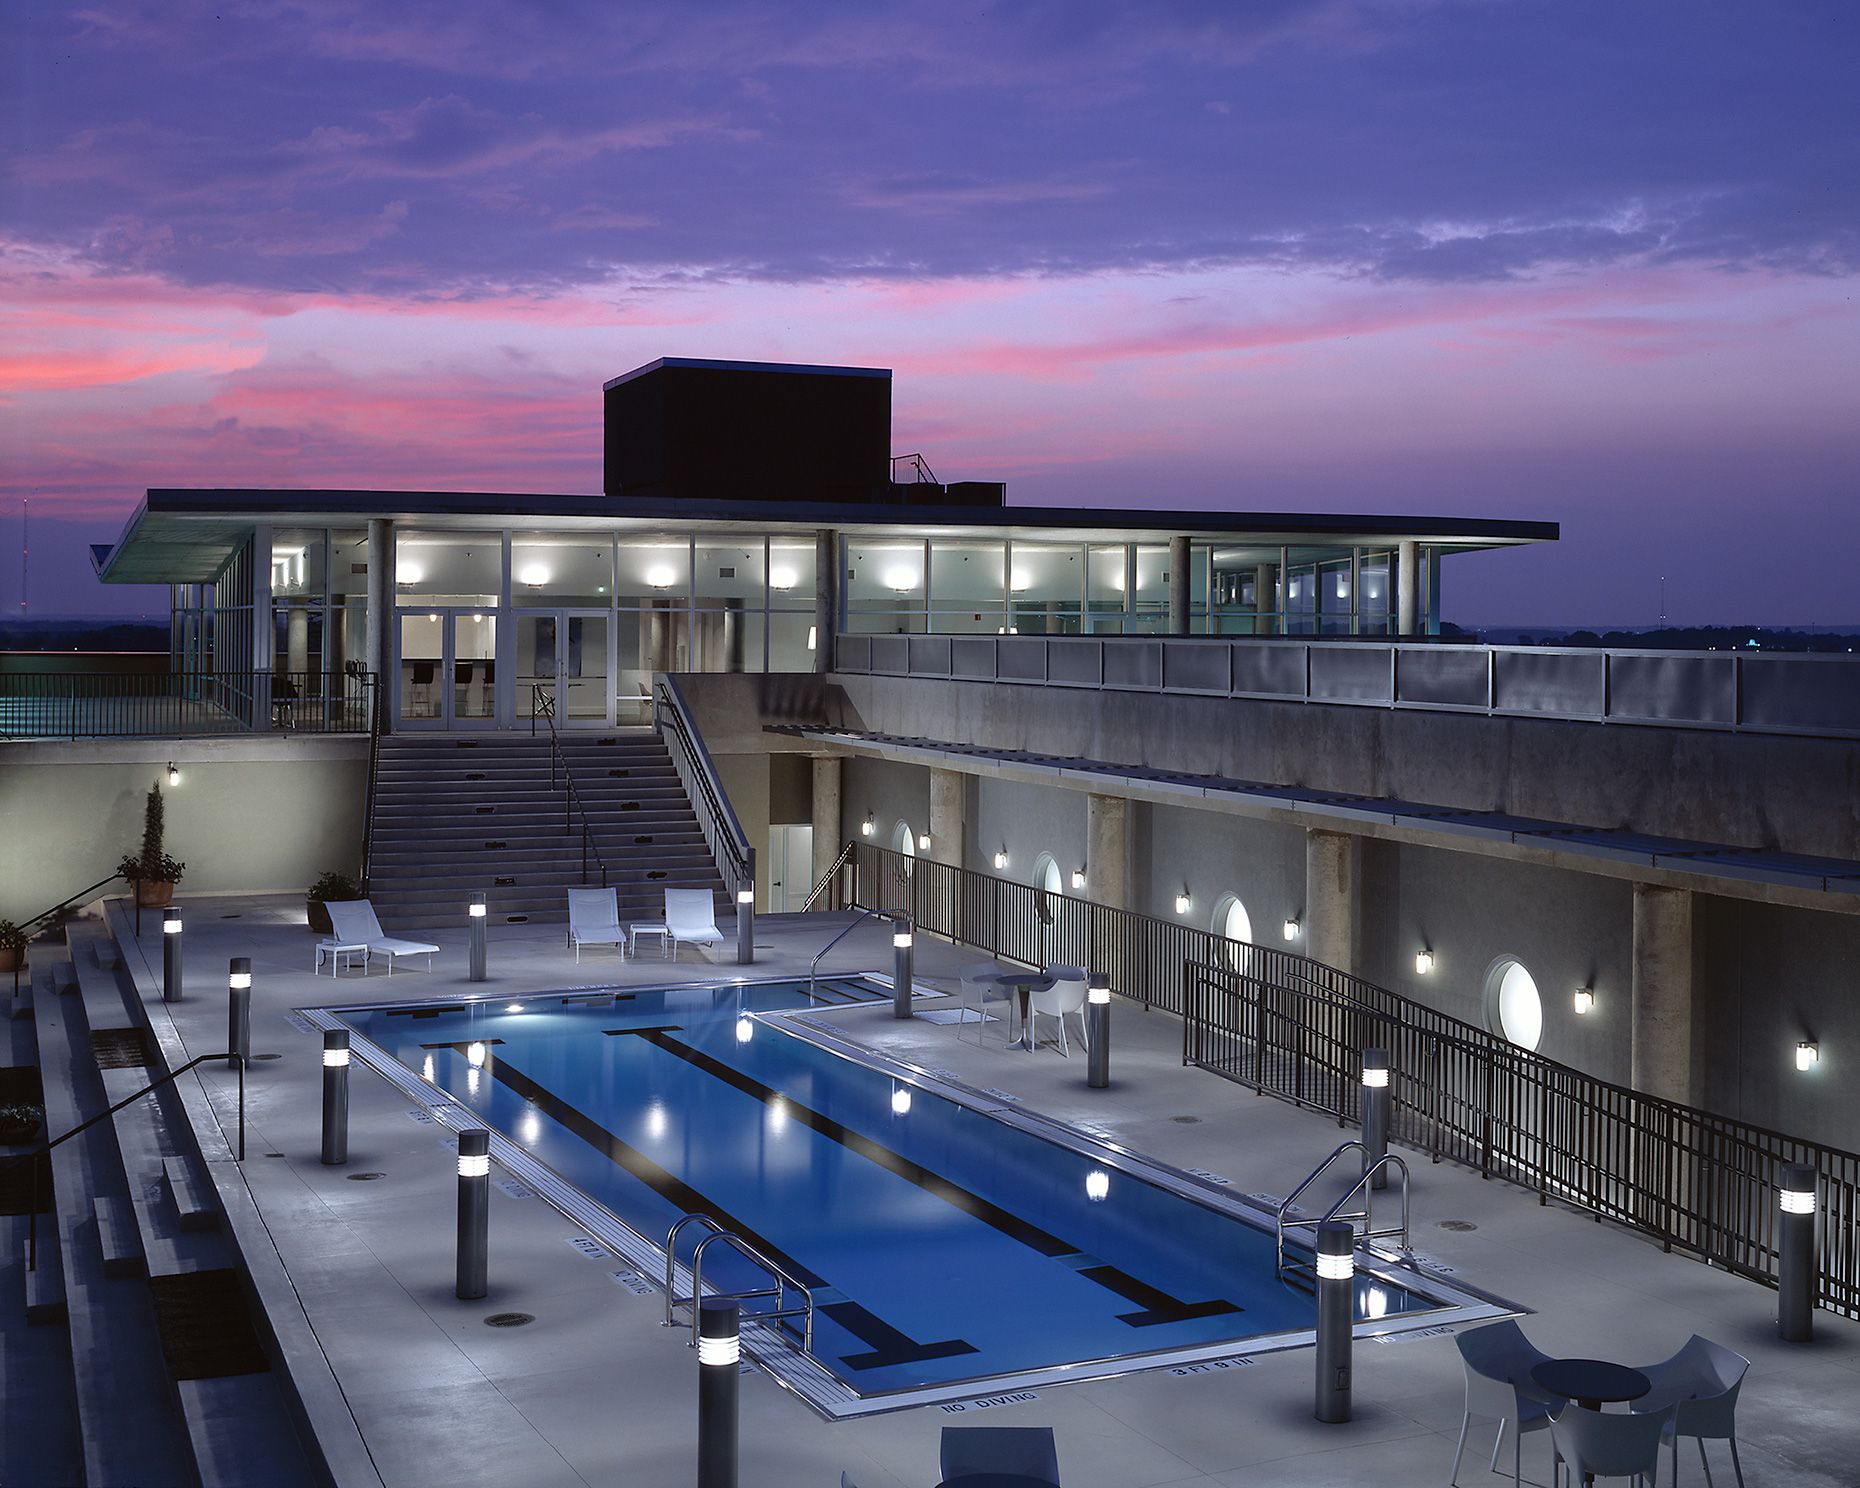 A nicely lighted rooftop pool at twilight at Mid-City Lofts in Atlanta, Georgia